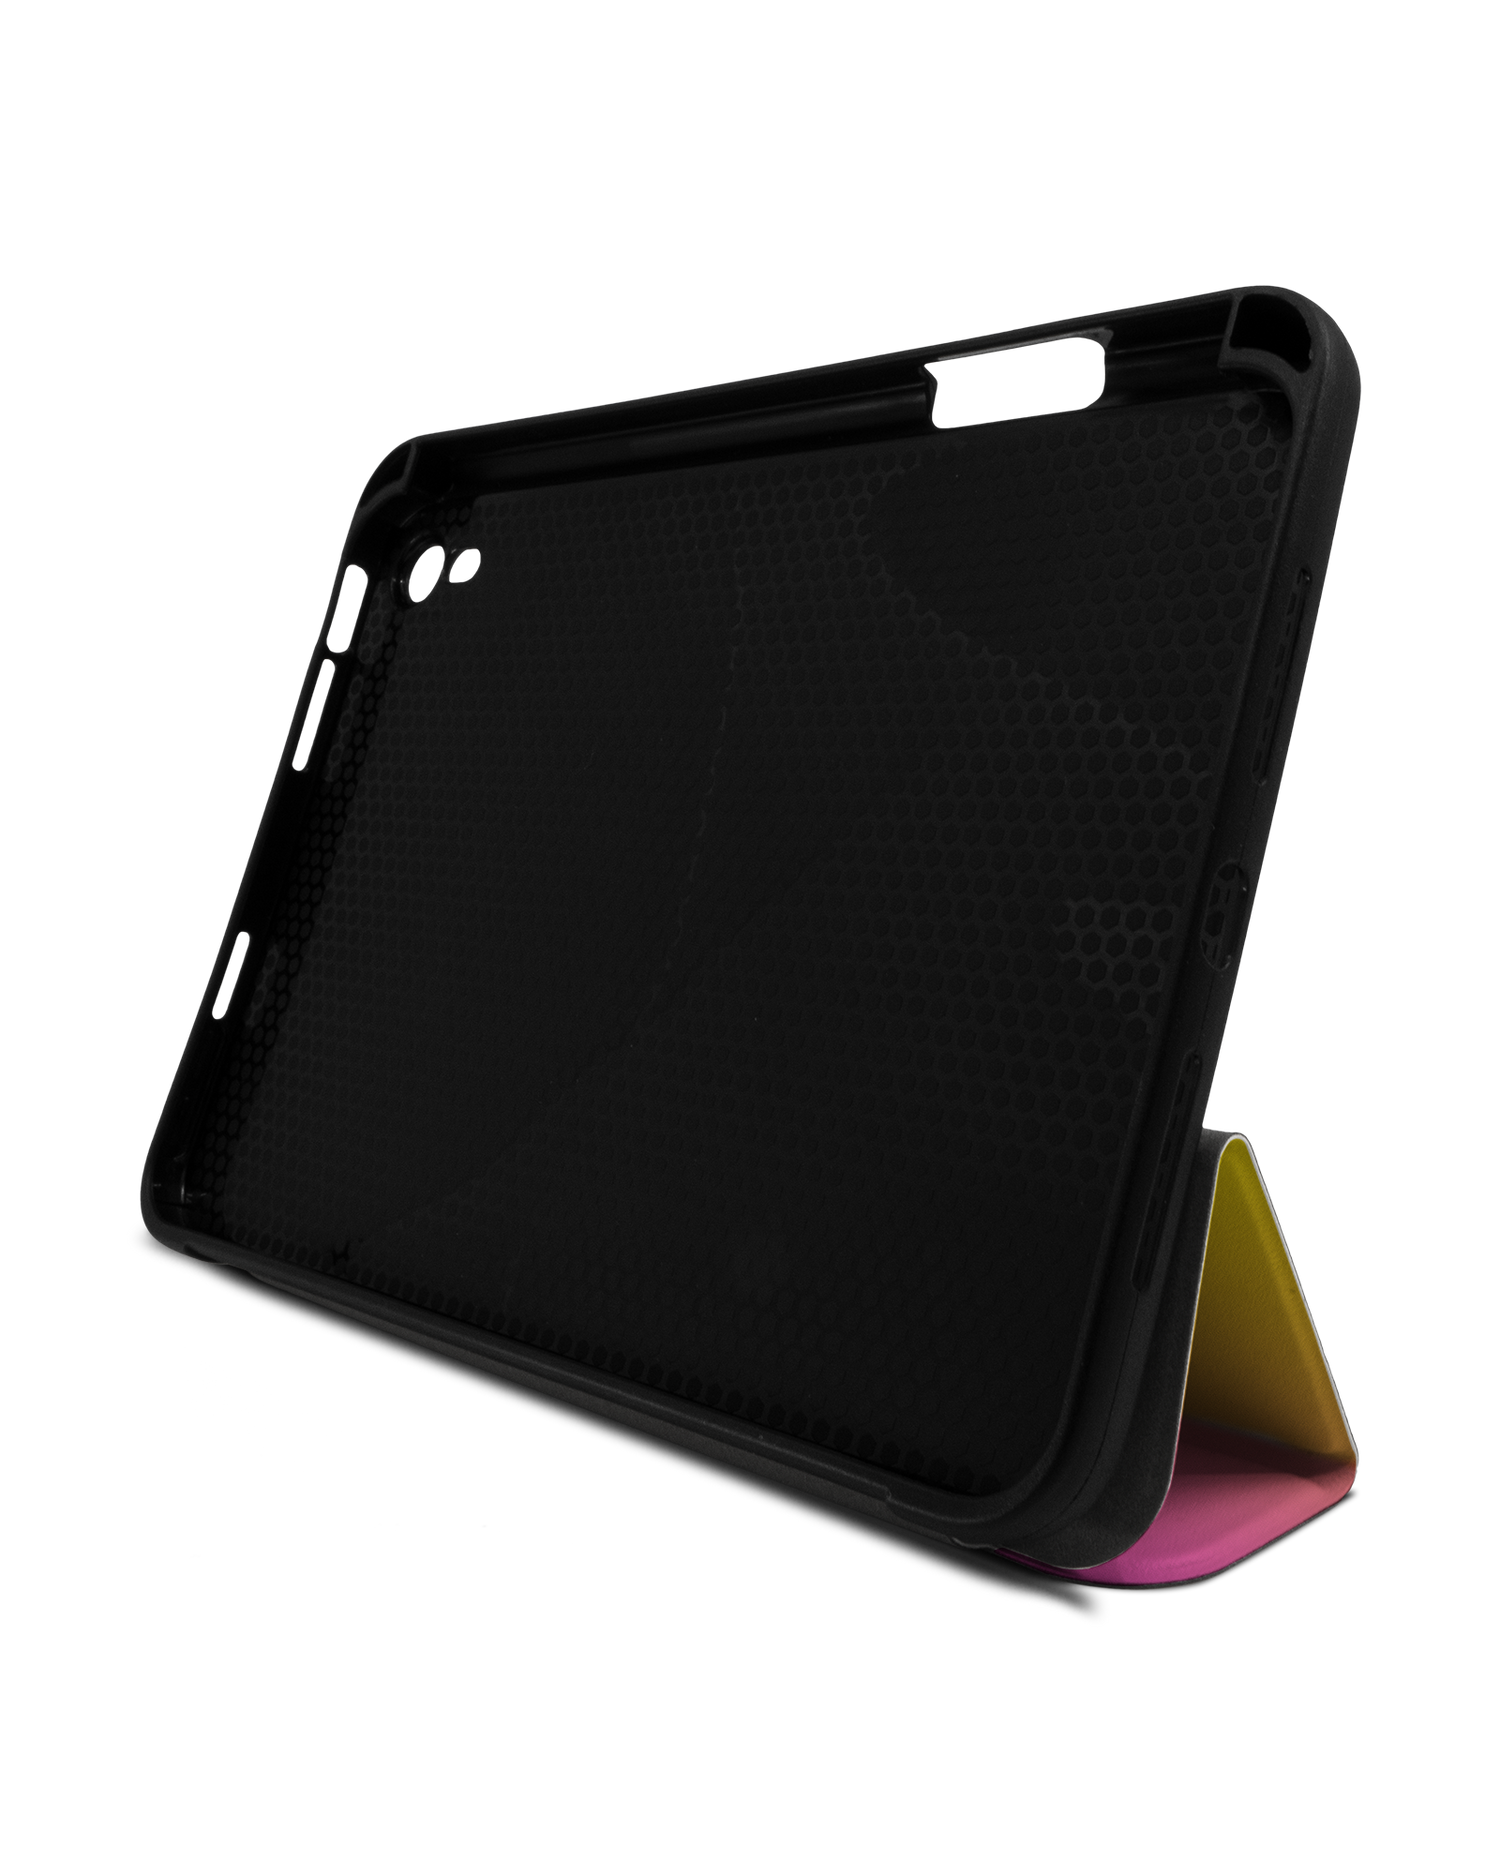 Have A Day iPad Case with Pencil Holder Apple iPad mini 6 (2021): Set up in landscape format (front view)